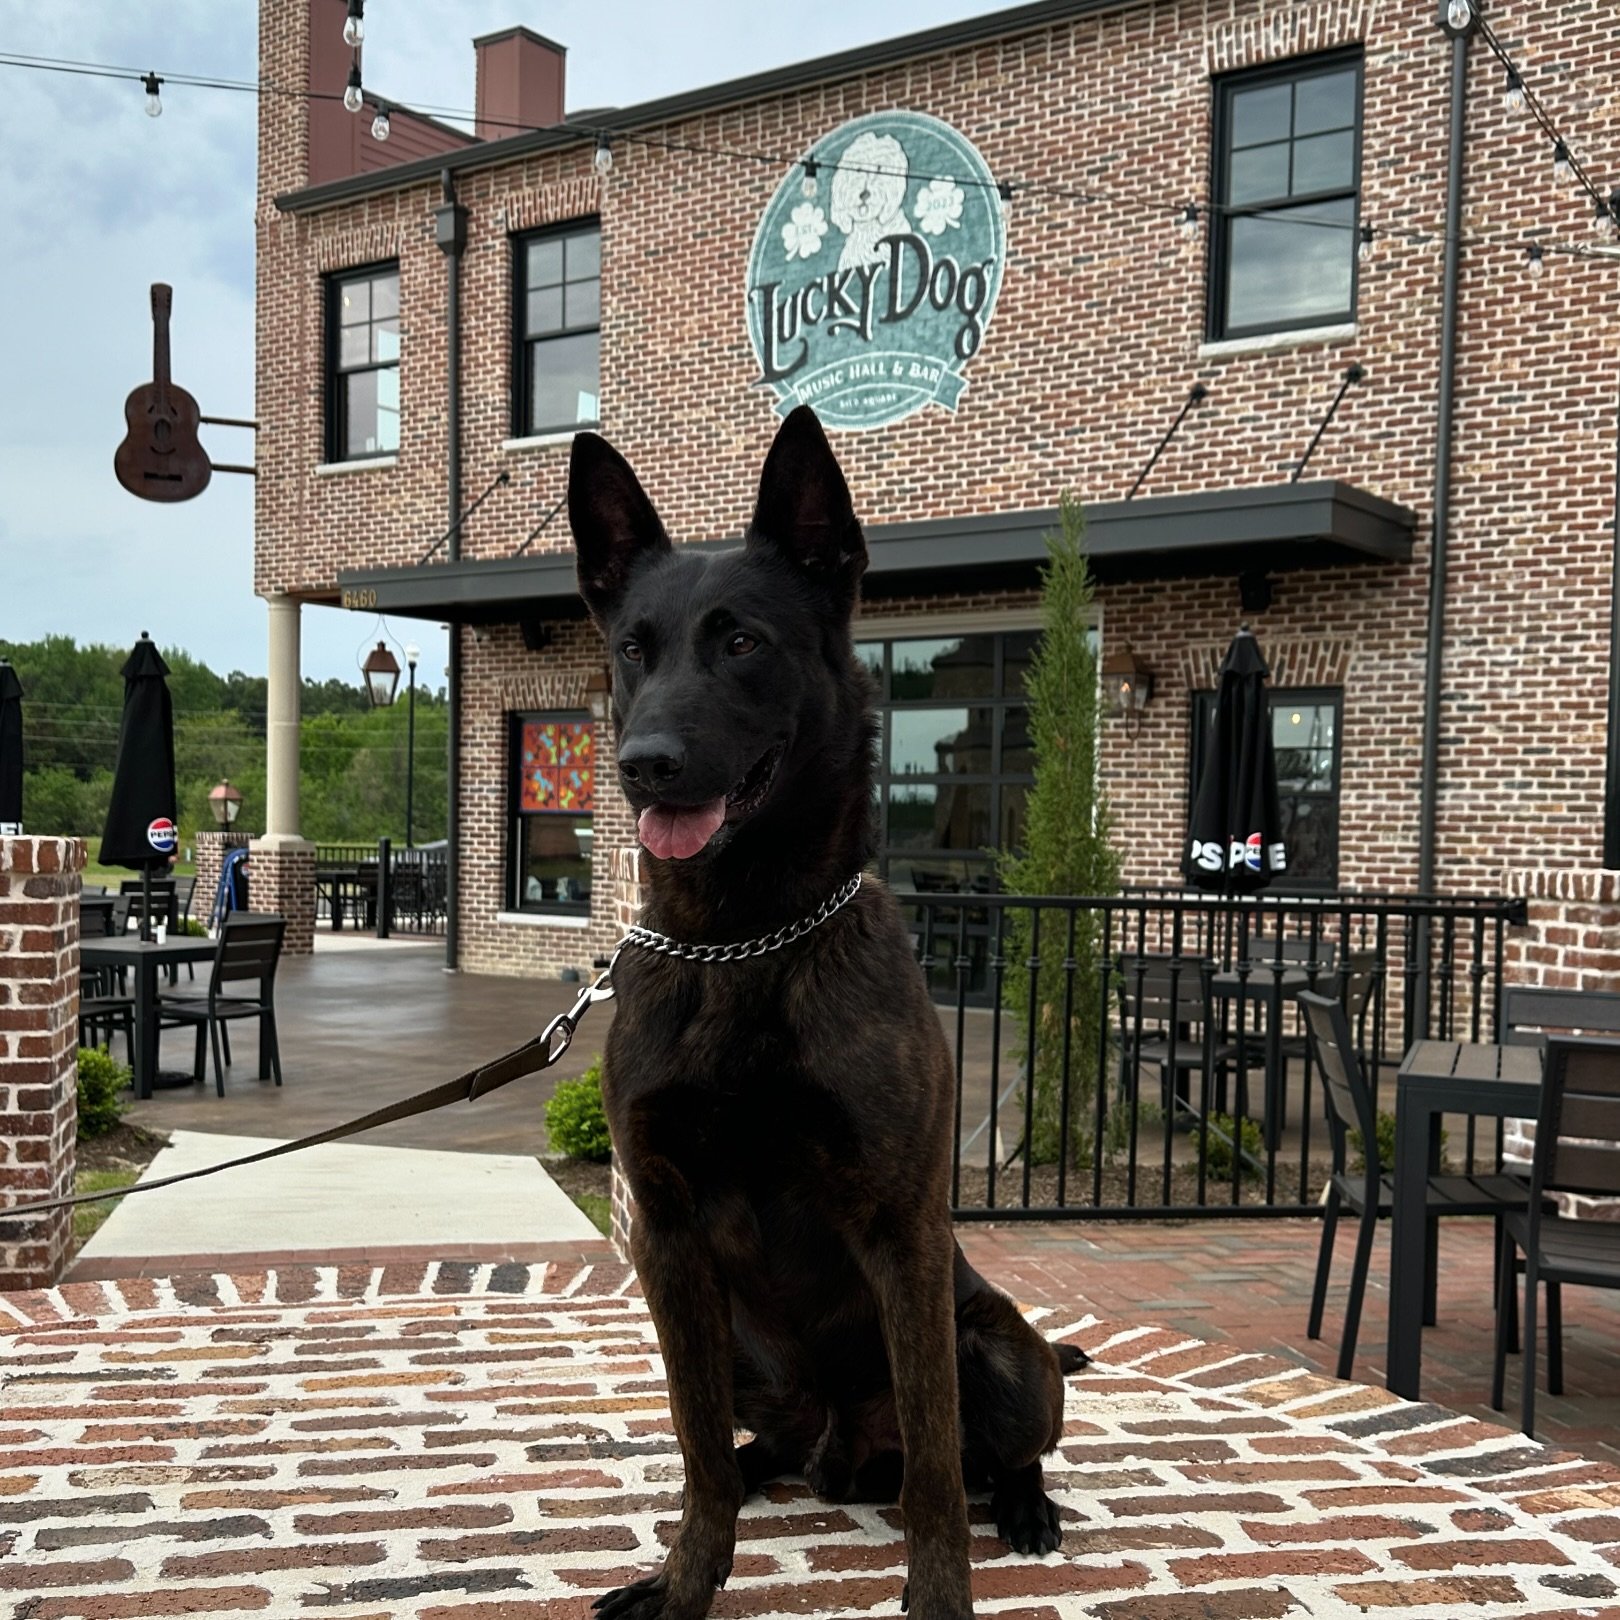 The best boy from the Southaven Police Department stopped by Lucky Dog this afternoon! 

Don&rsquo;t forget @luckydogsilosquare is NOW OPEN for lunch &amp; dinner. Enjoy live music Thursday-Saturday nights! Also don&rsquo;t forget your lucky dog can 